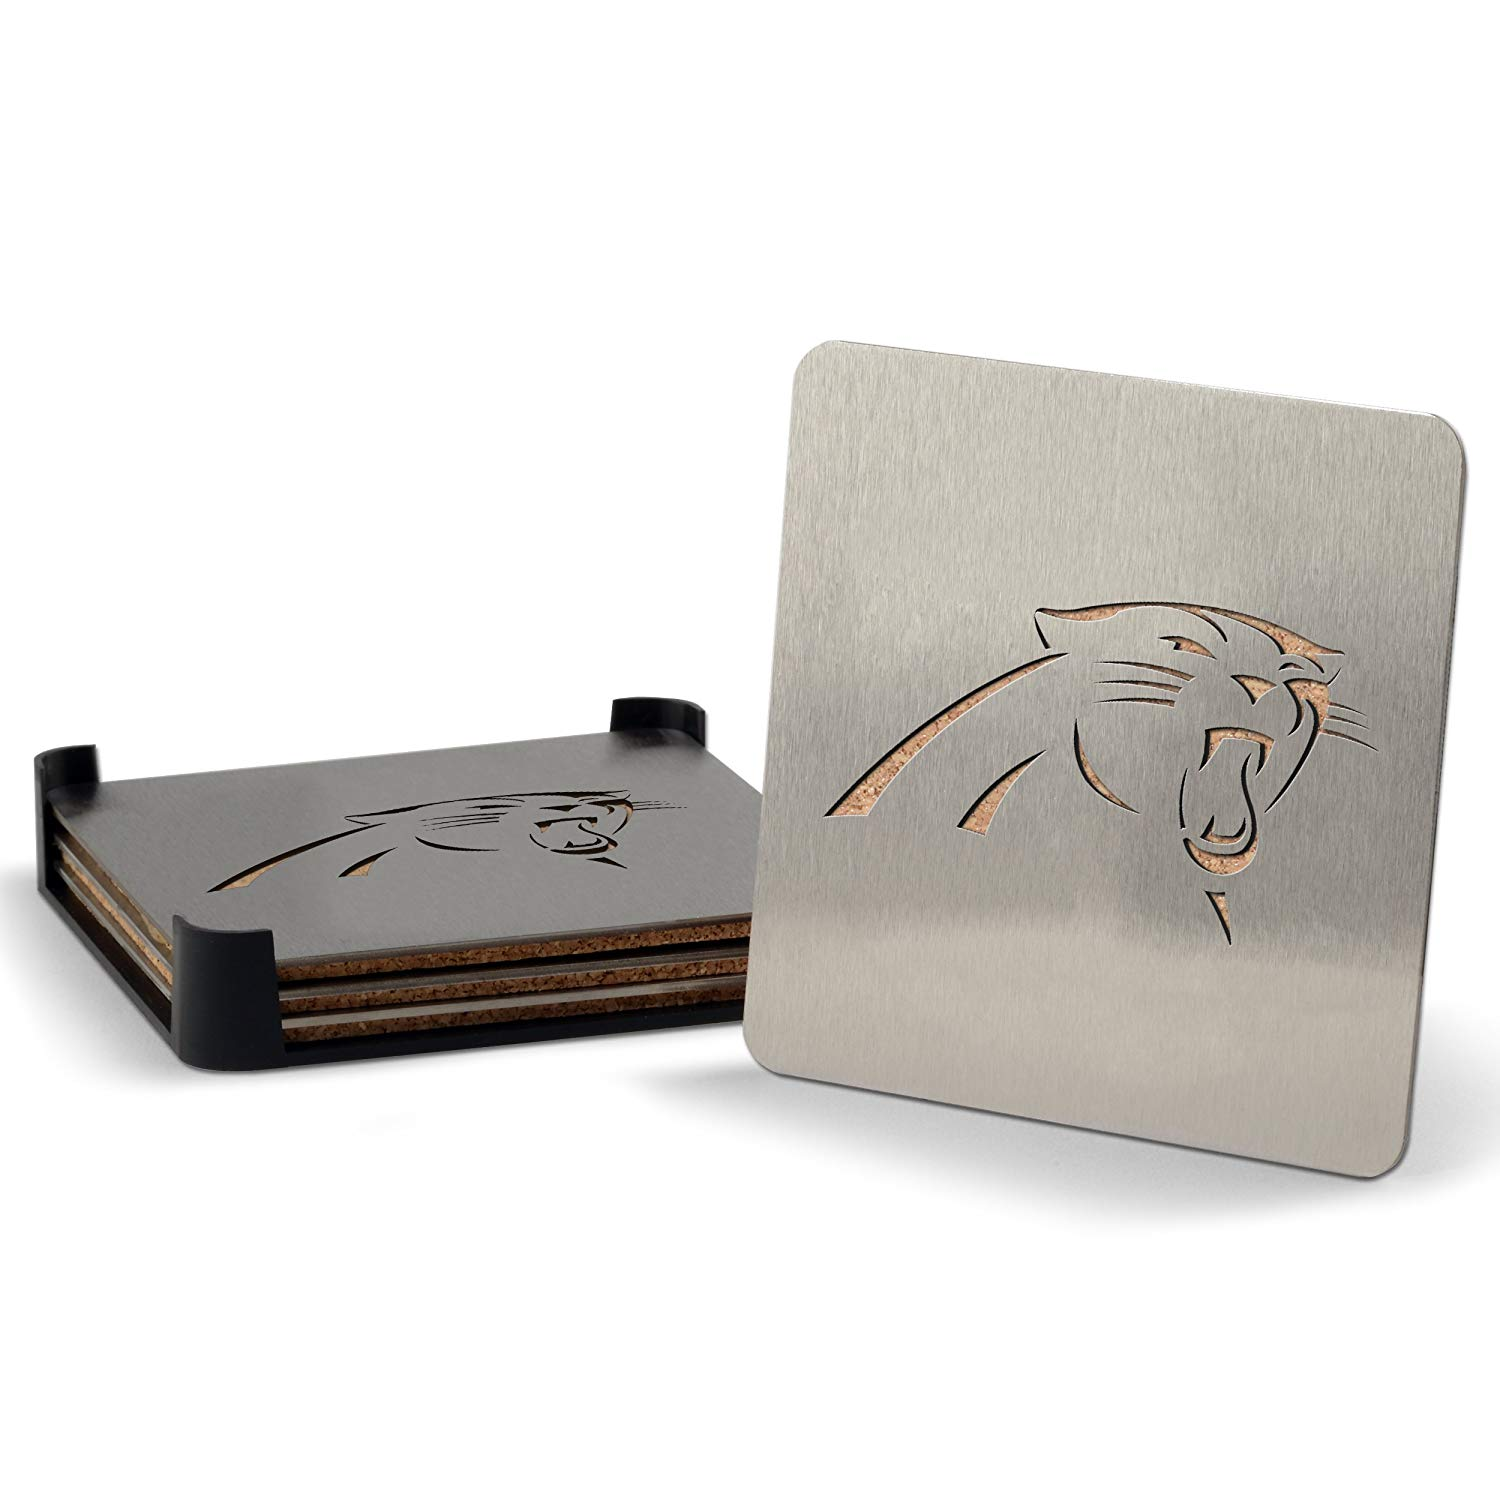 No drinks on the table, mofo.<br><br> Get some classy coasters and support your favorite team <a href="https://amzn.to/2MPXsBV" "nofollow" target="_blank">here</a>.